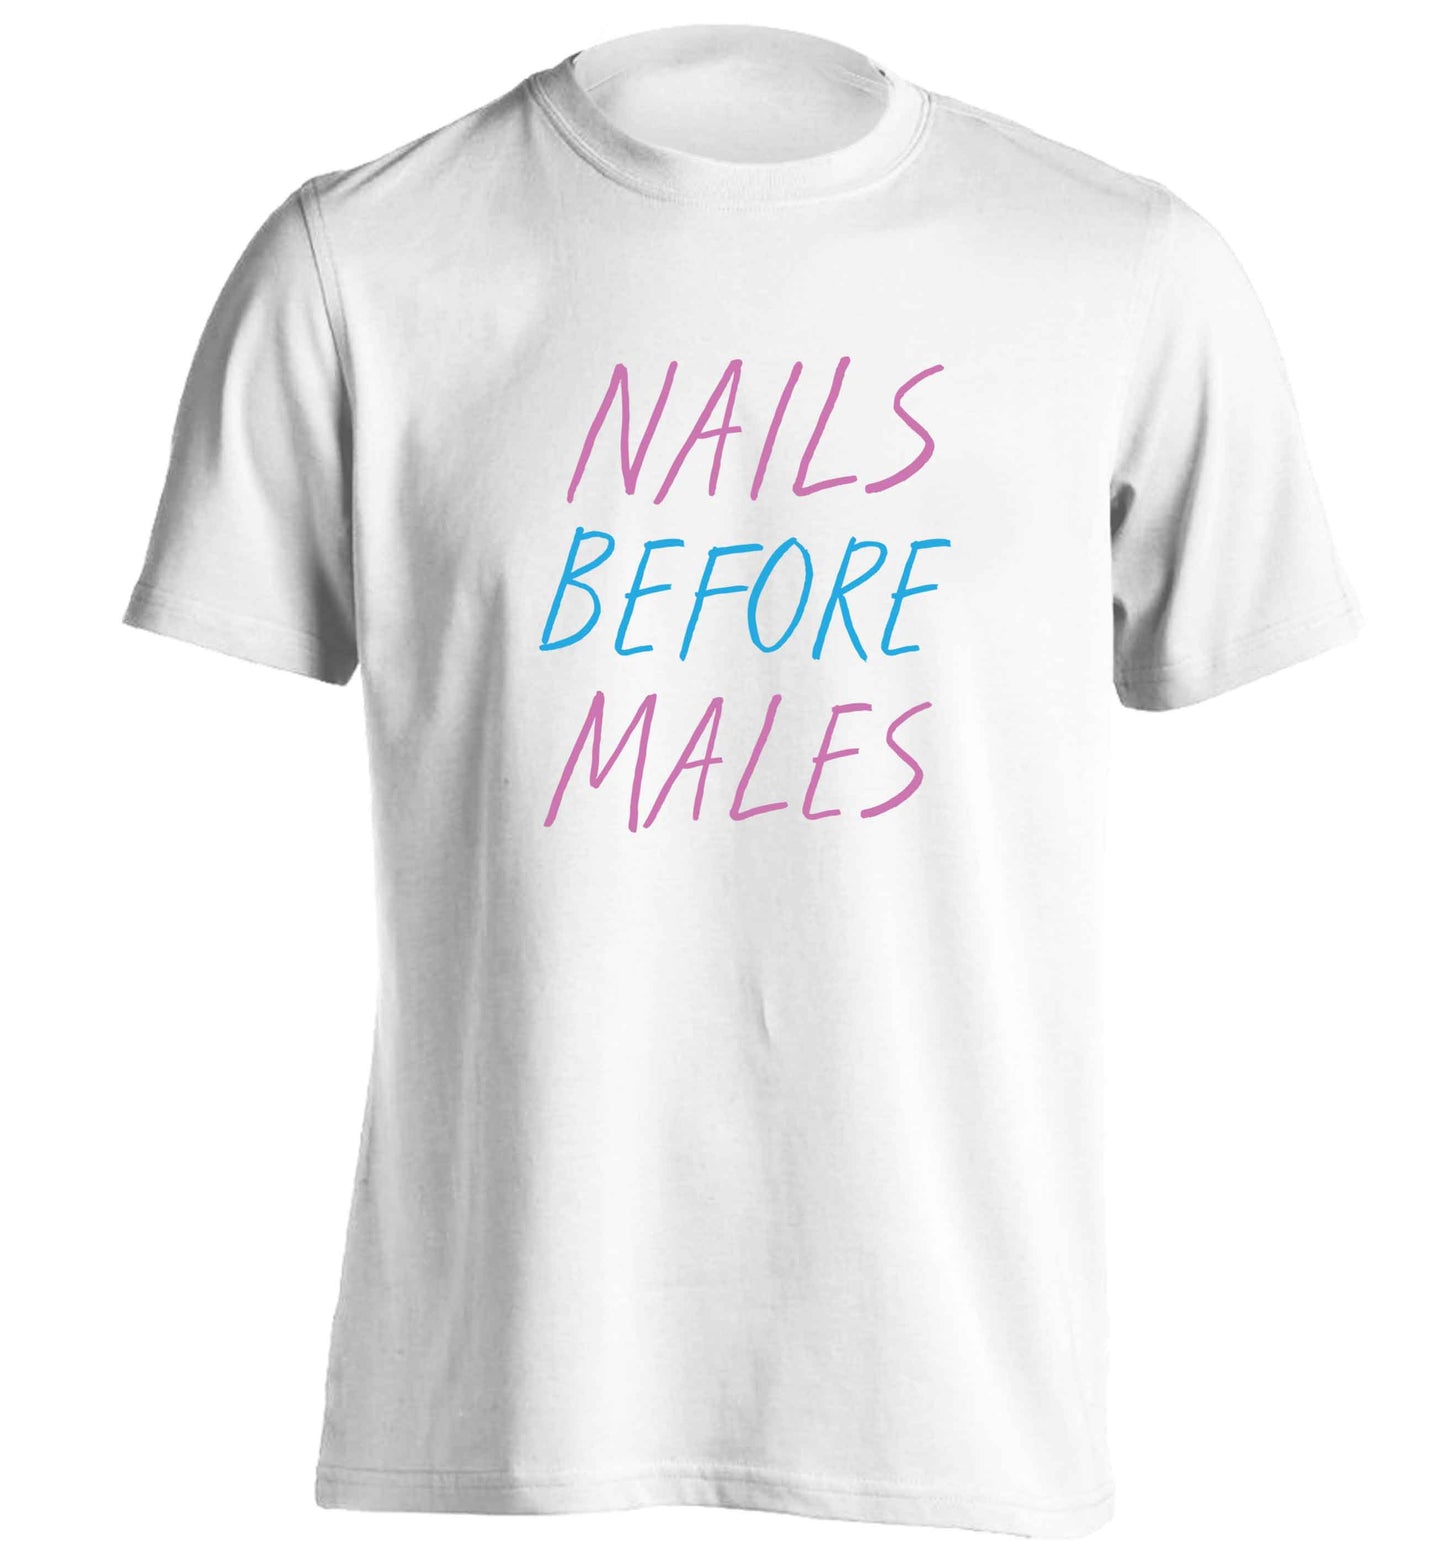 Nails before males adults unisex white Tshirt 2XL